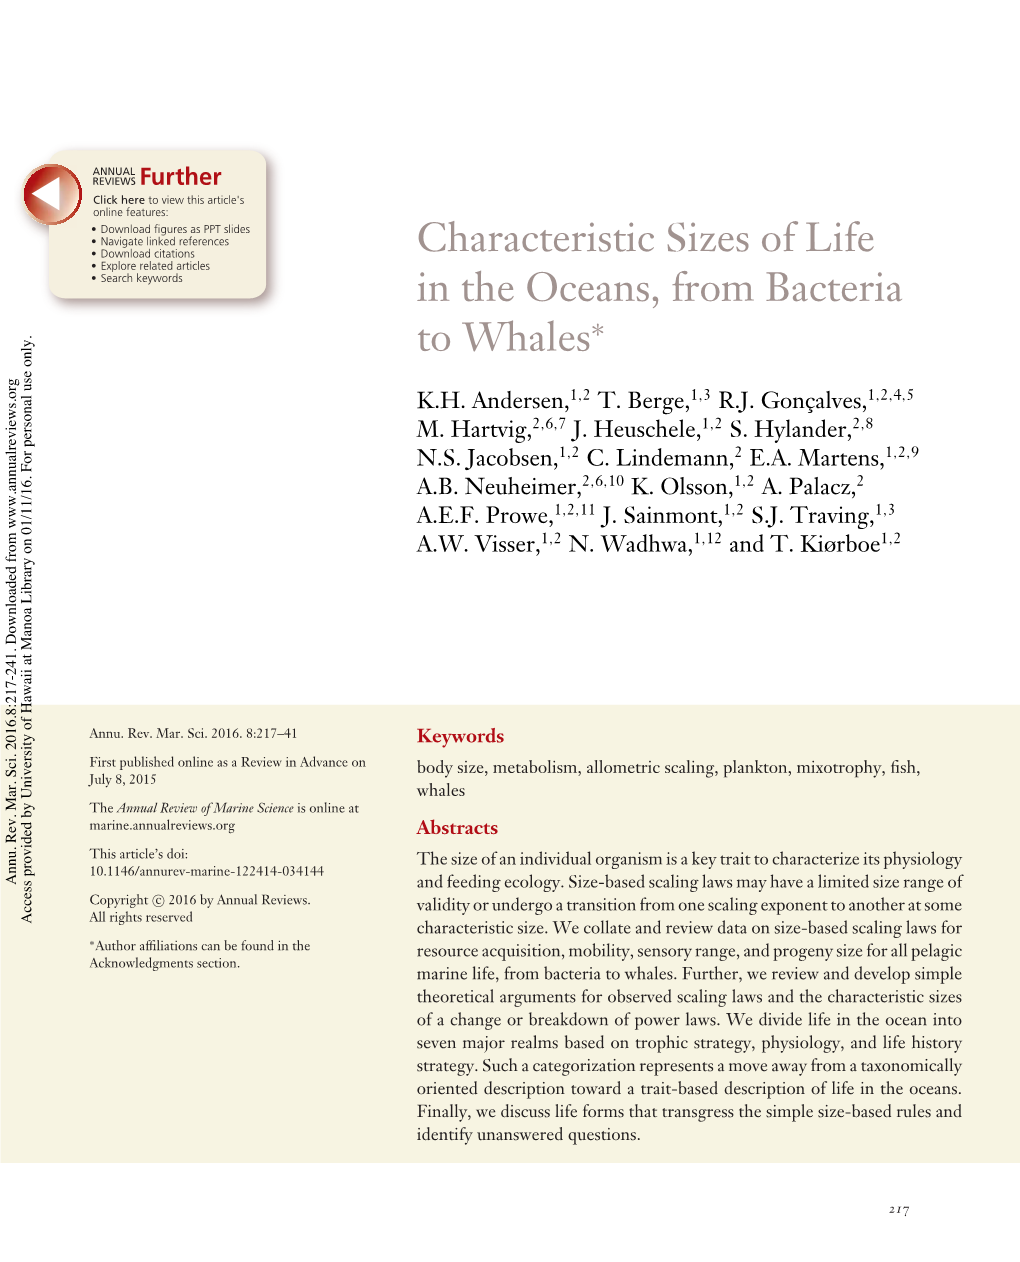 Characteristic Sizes of Life in the Oceans, from Bacteria to Whales ♣♣♣♣♣♣♣♣♣ K.H